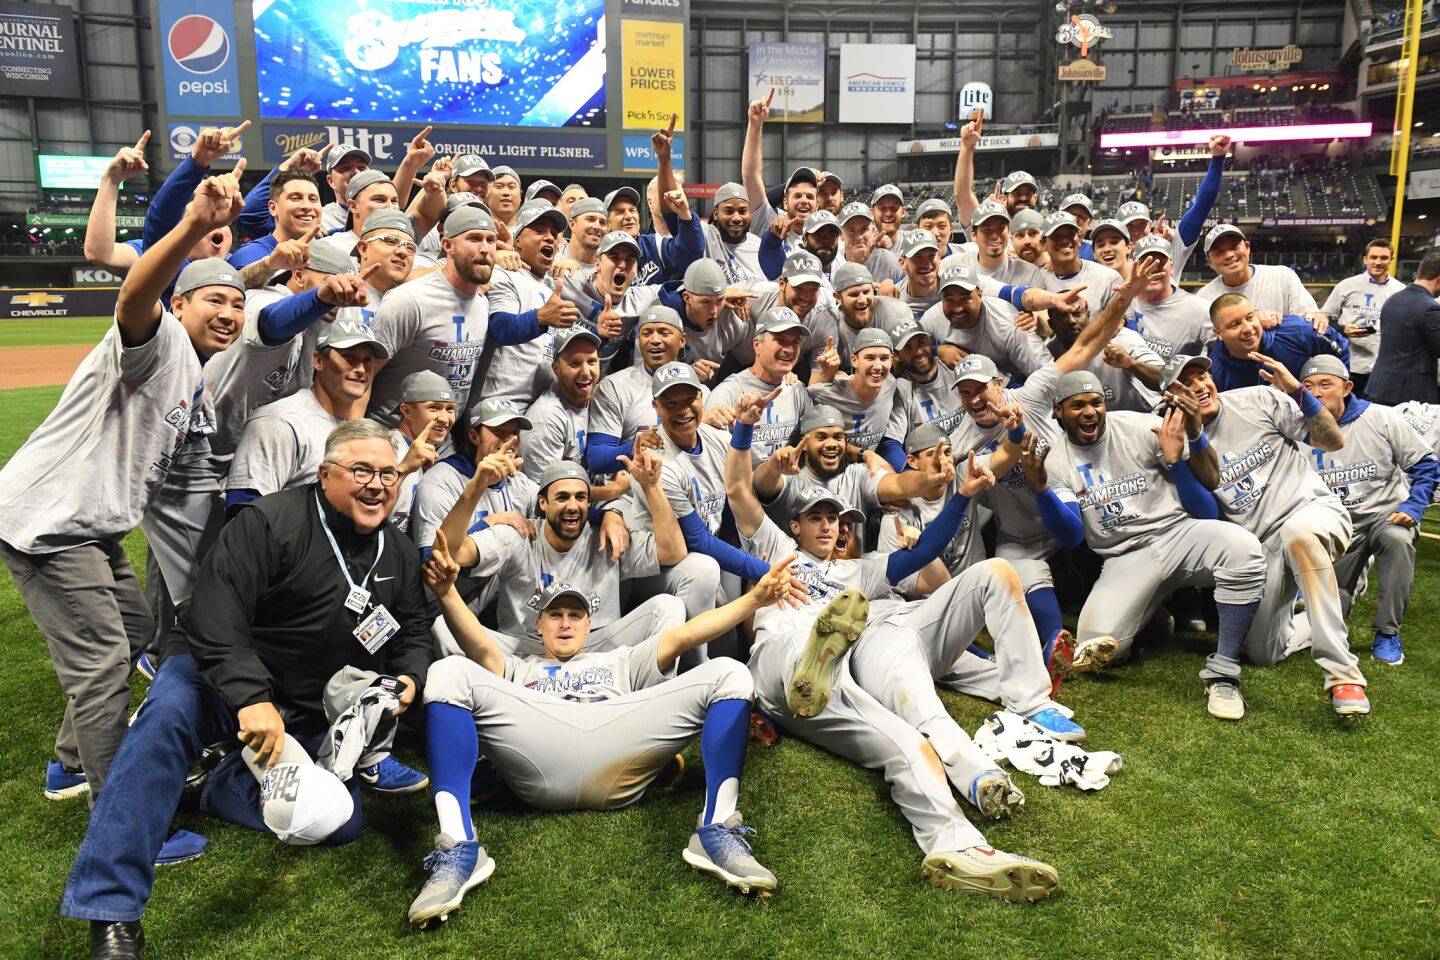 The Dodgers pose for pictures after beating the Brewers in game seven of the National League Championship Series against the Milwaukee Brewers at Miller Park.